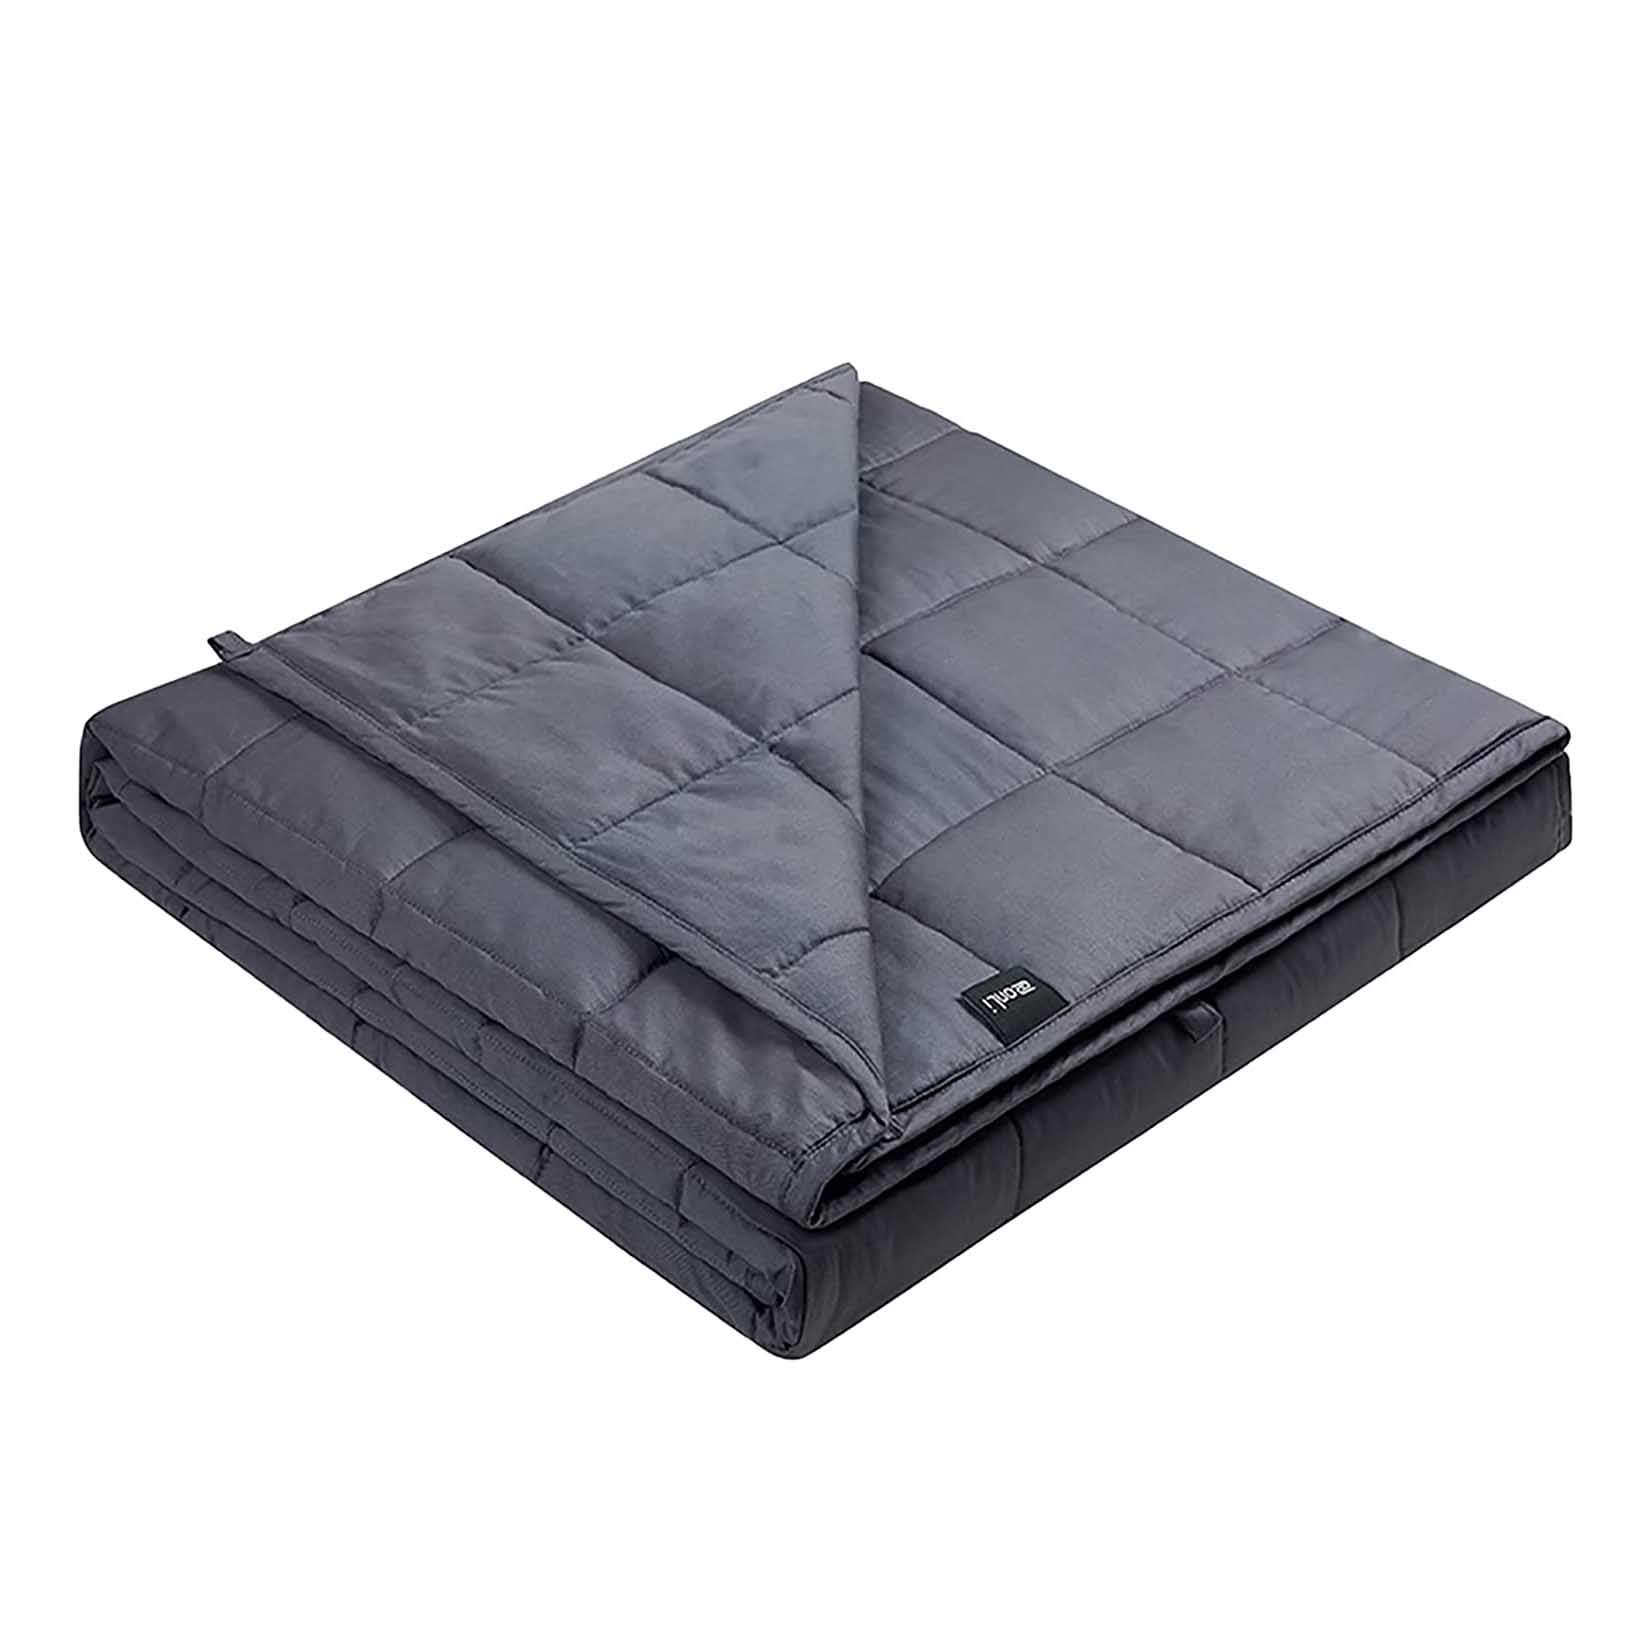 Wholesale High Quality Weighted Knitted Blanket Exporter- Weighted Blanket (60”x80”, 20lbs, Dark Grey), Cooling Weighted Blanket for Adults, High Breathability Heavy Blanket, Soft Mate...